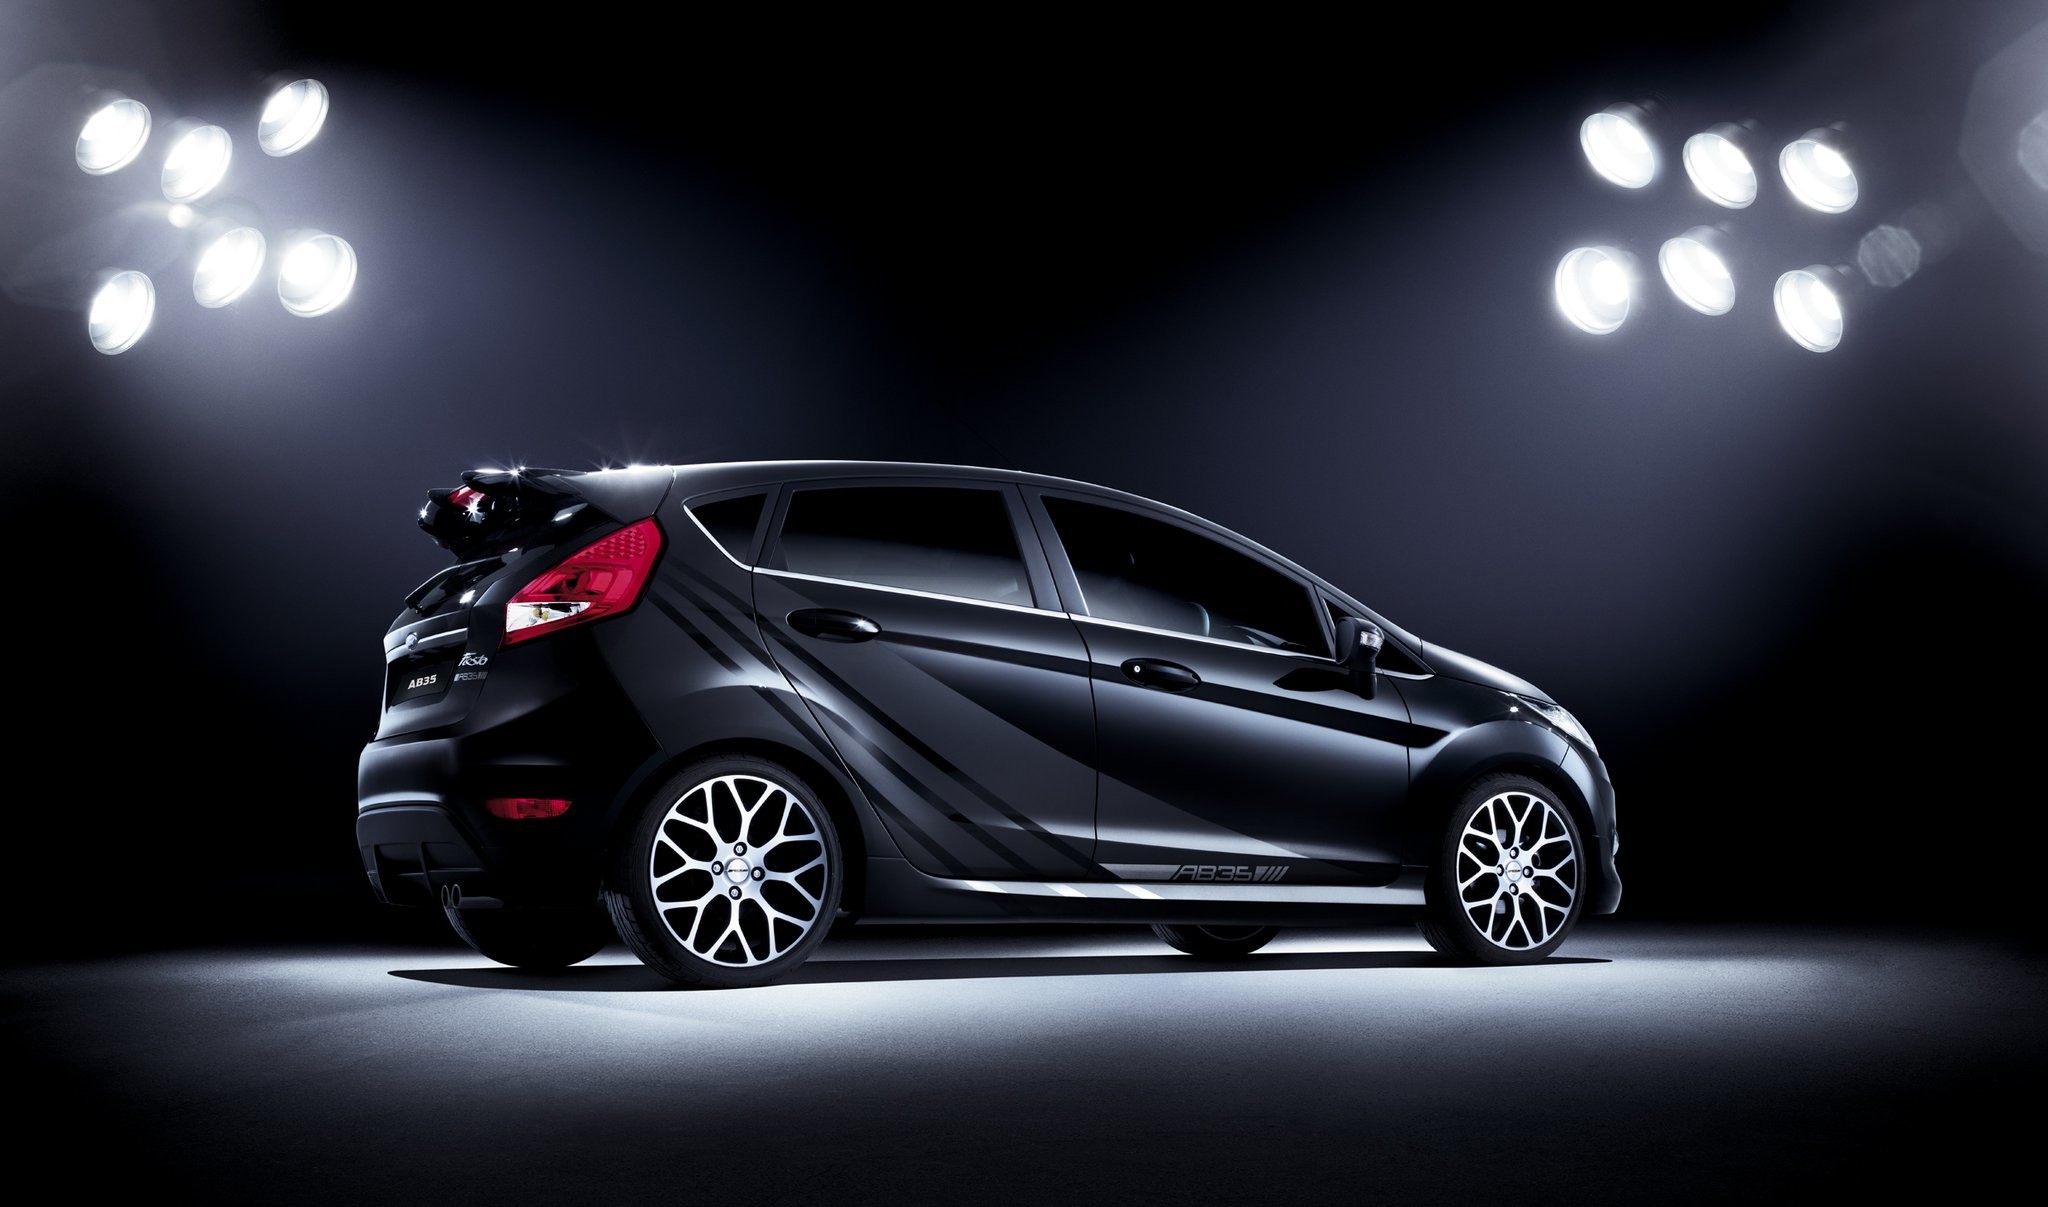 On August 20, 2015 By Stephen Comments Off on Ford Fiesta Wallpapers